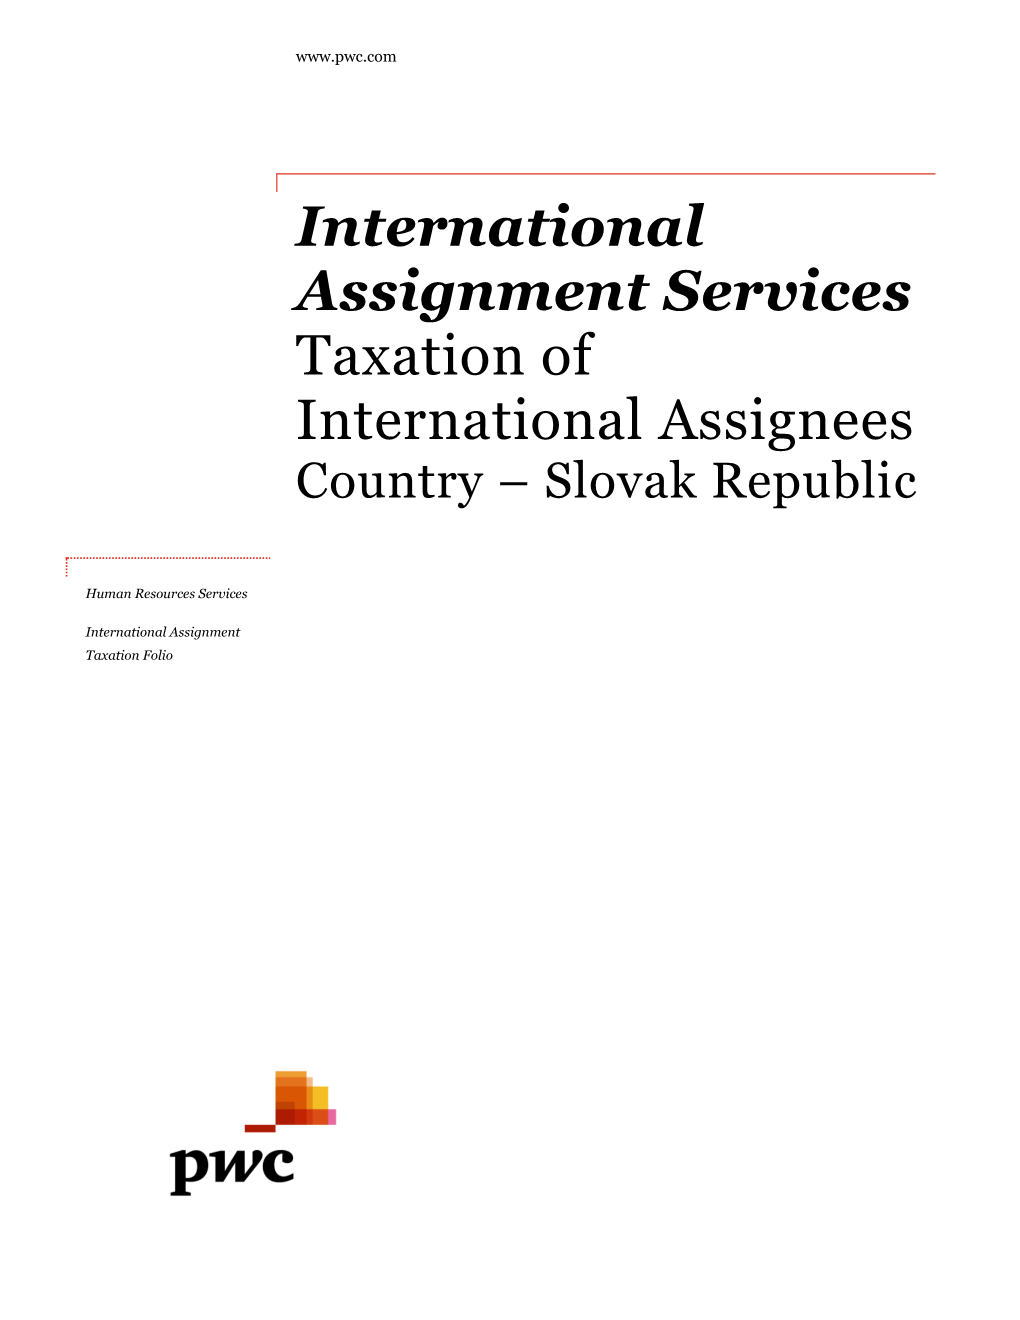 International Assignment Services Taxation of International Assignees Country – Slovak Republic